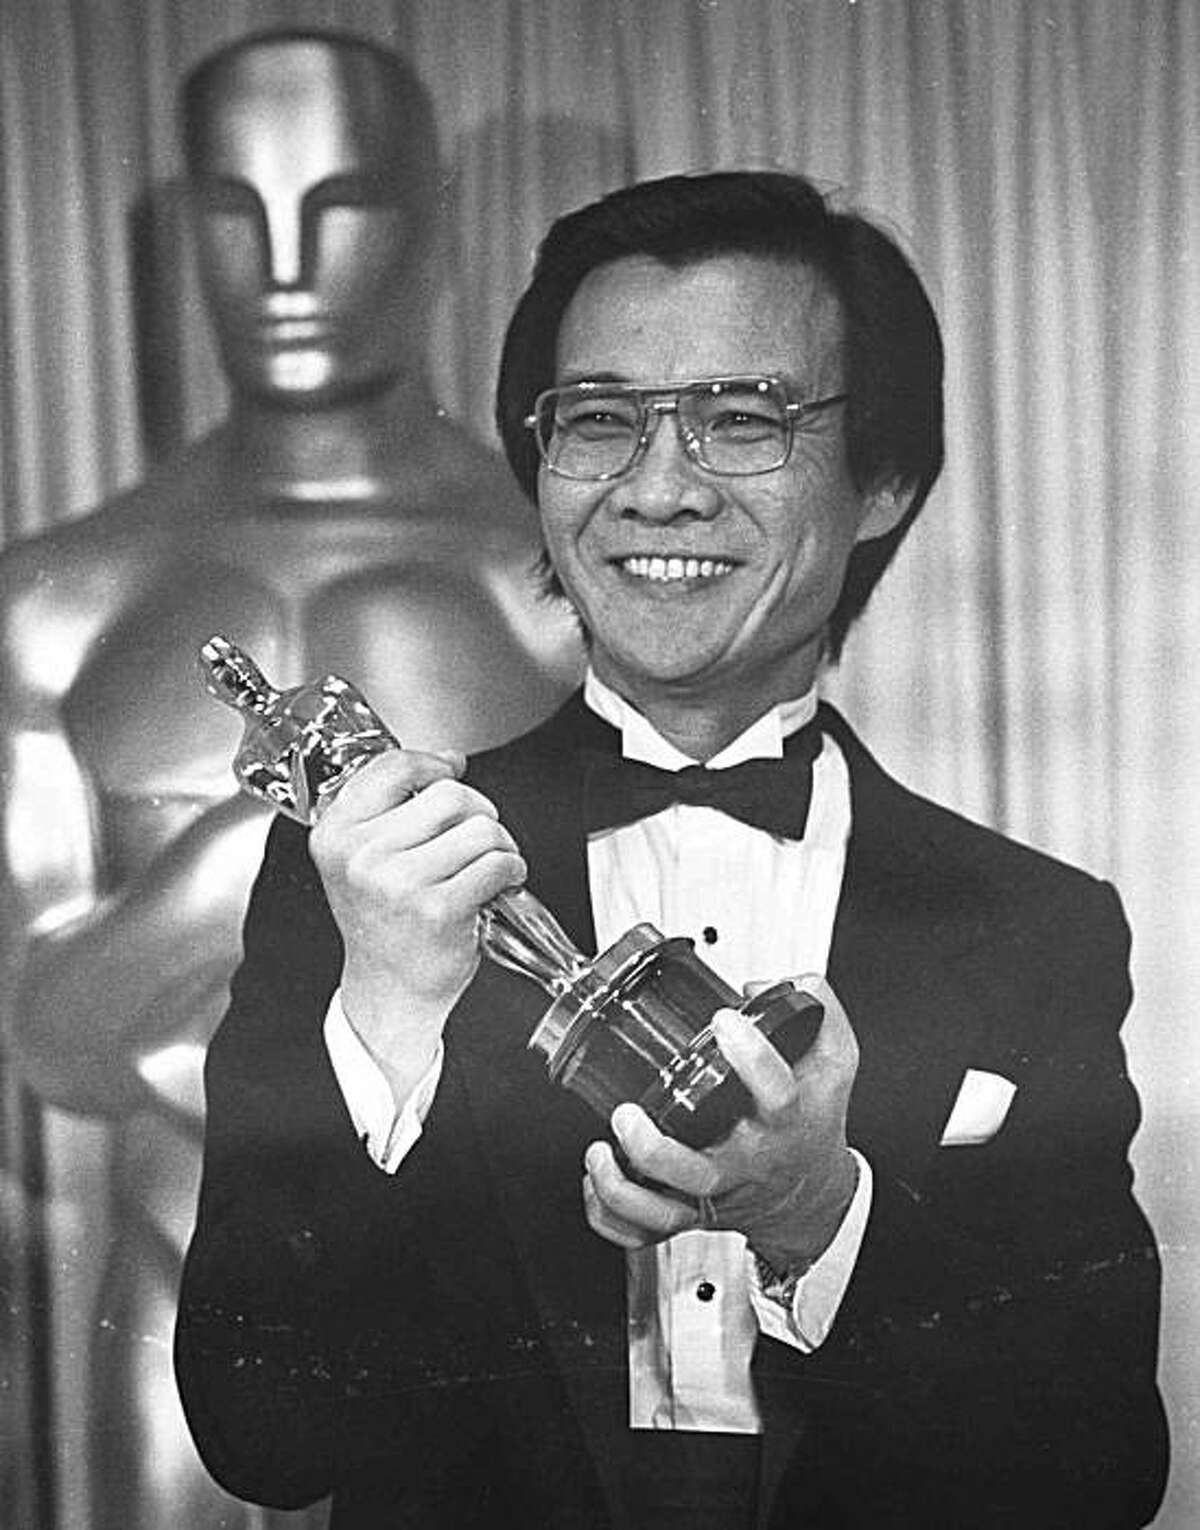 Cambodian refugee Haing S. Ngor, winner of the Best Supporting Actor catagory for his role in "The Killing Fields", holds high his Oscar backstage at the 57th annual Academy Awards presentations Monday, March 26, 1985. (AP Photo)